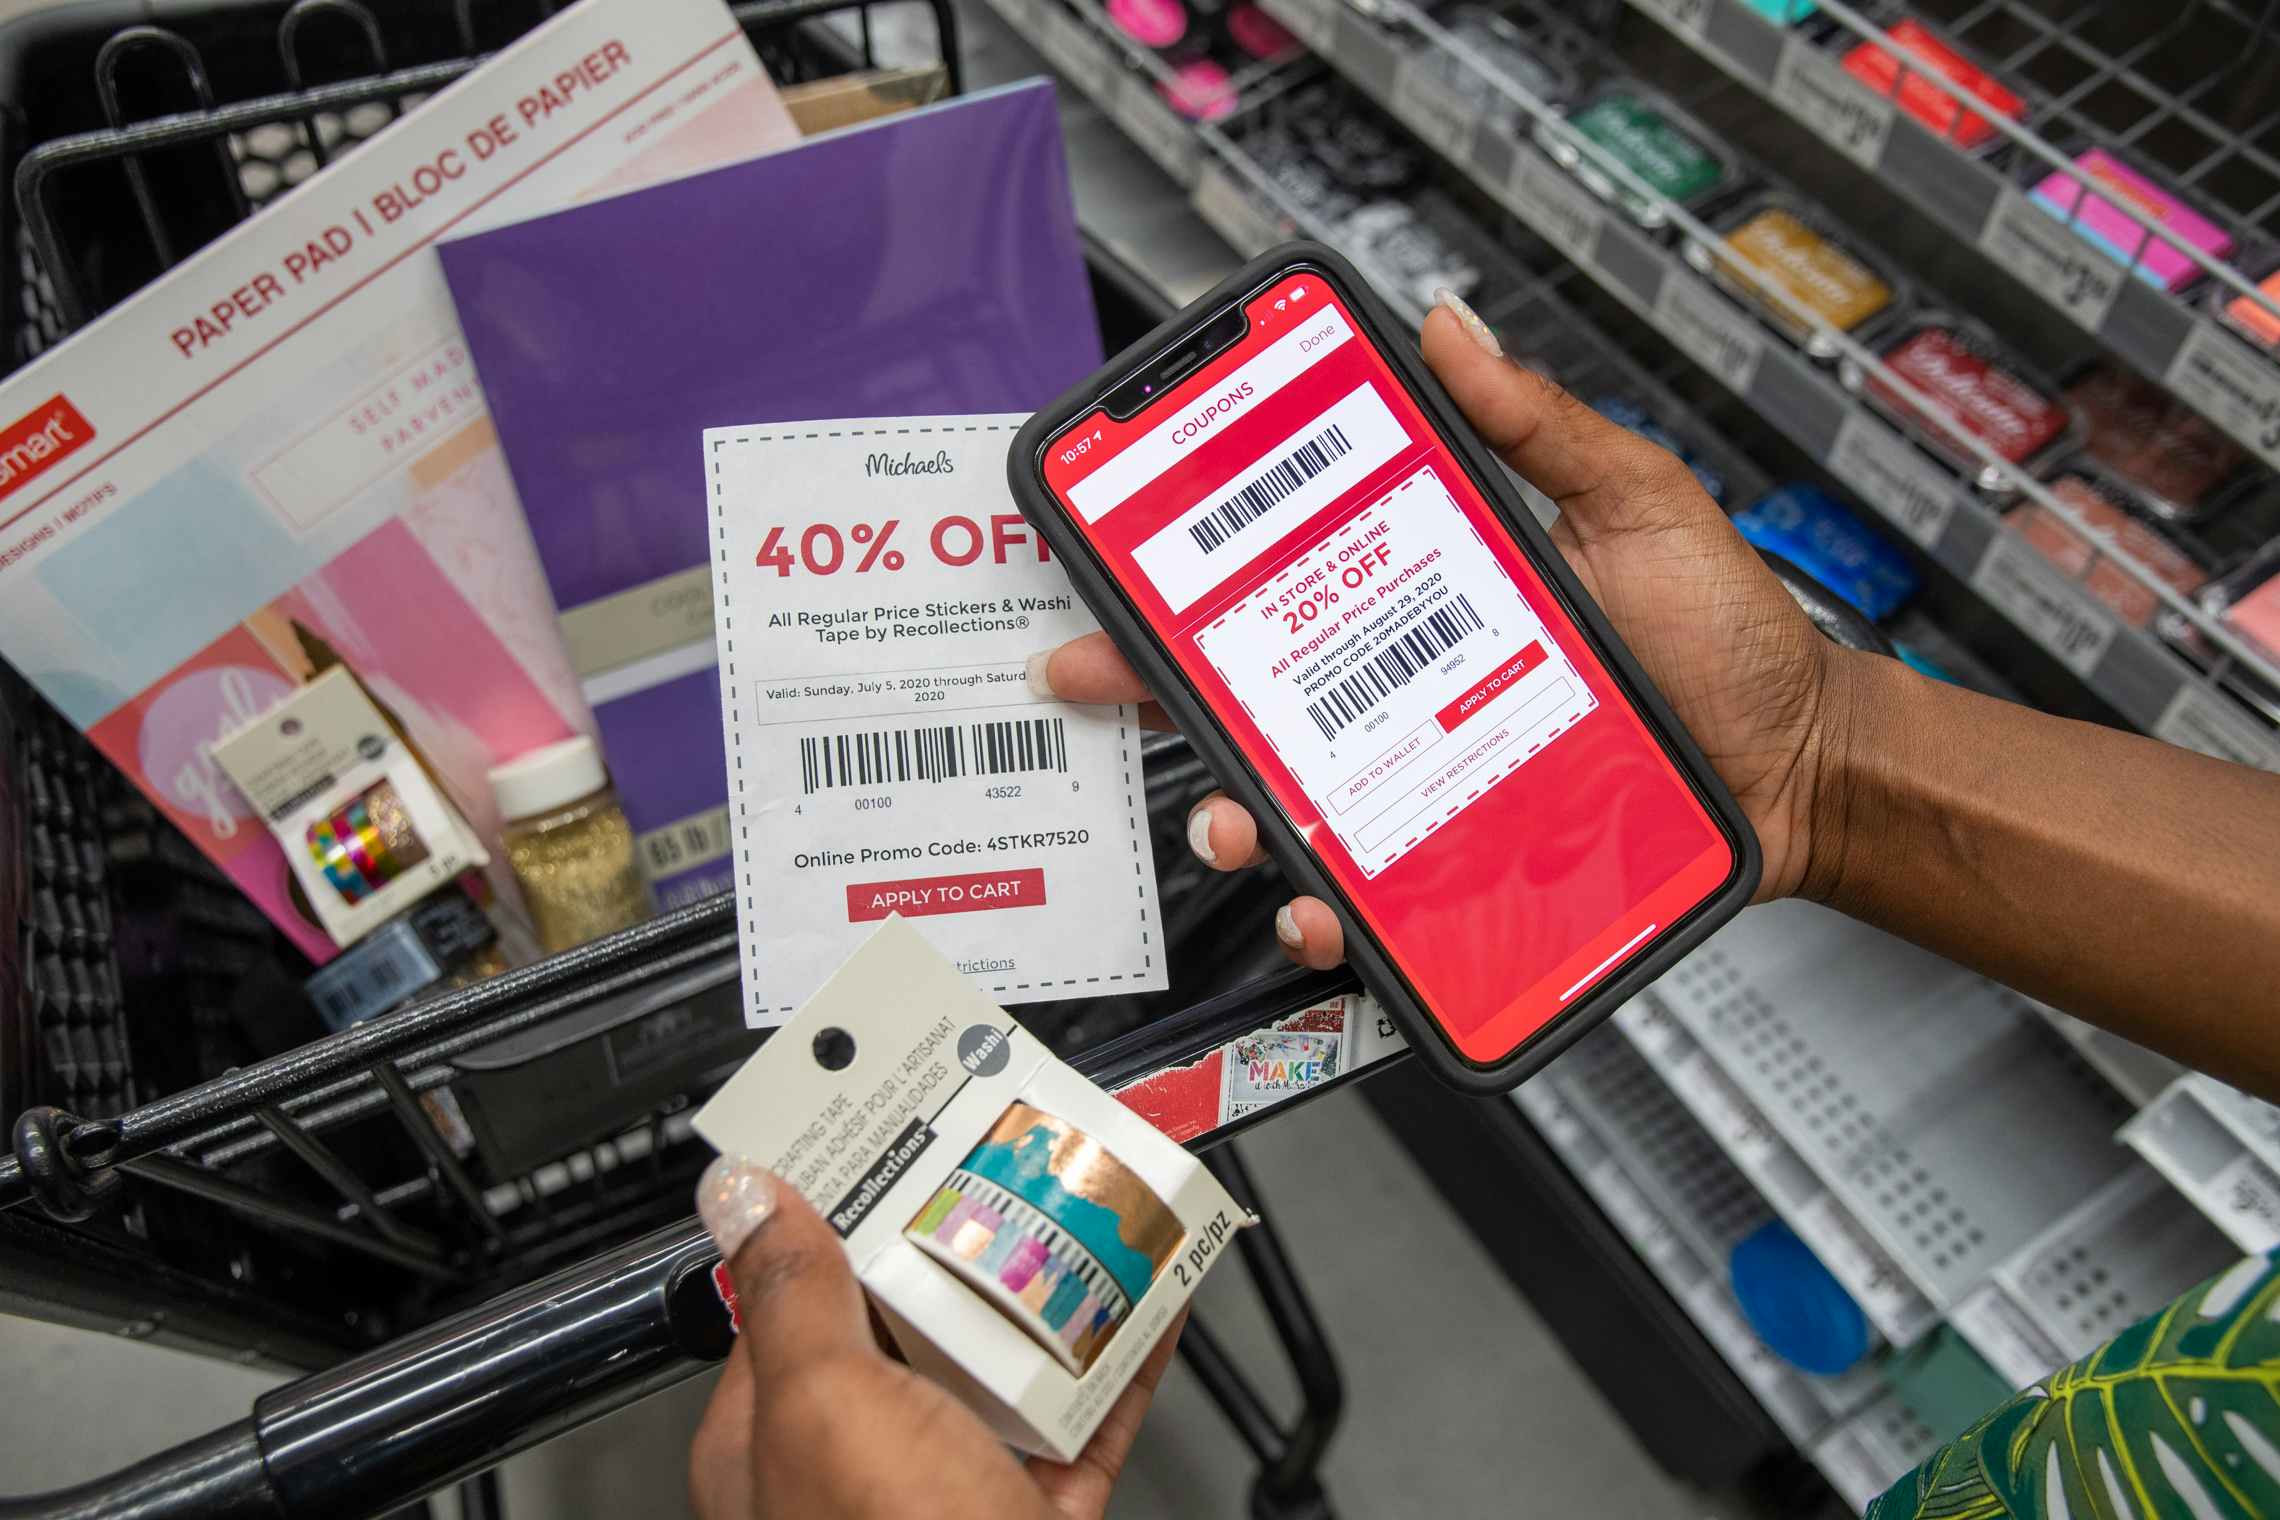 A person holding washi tape, a paper coupon, and an iphone with a second coupon next to a cart filled with products at Michaels.